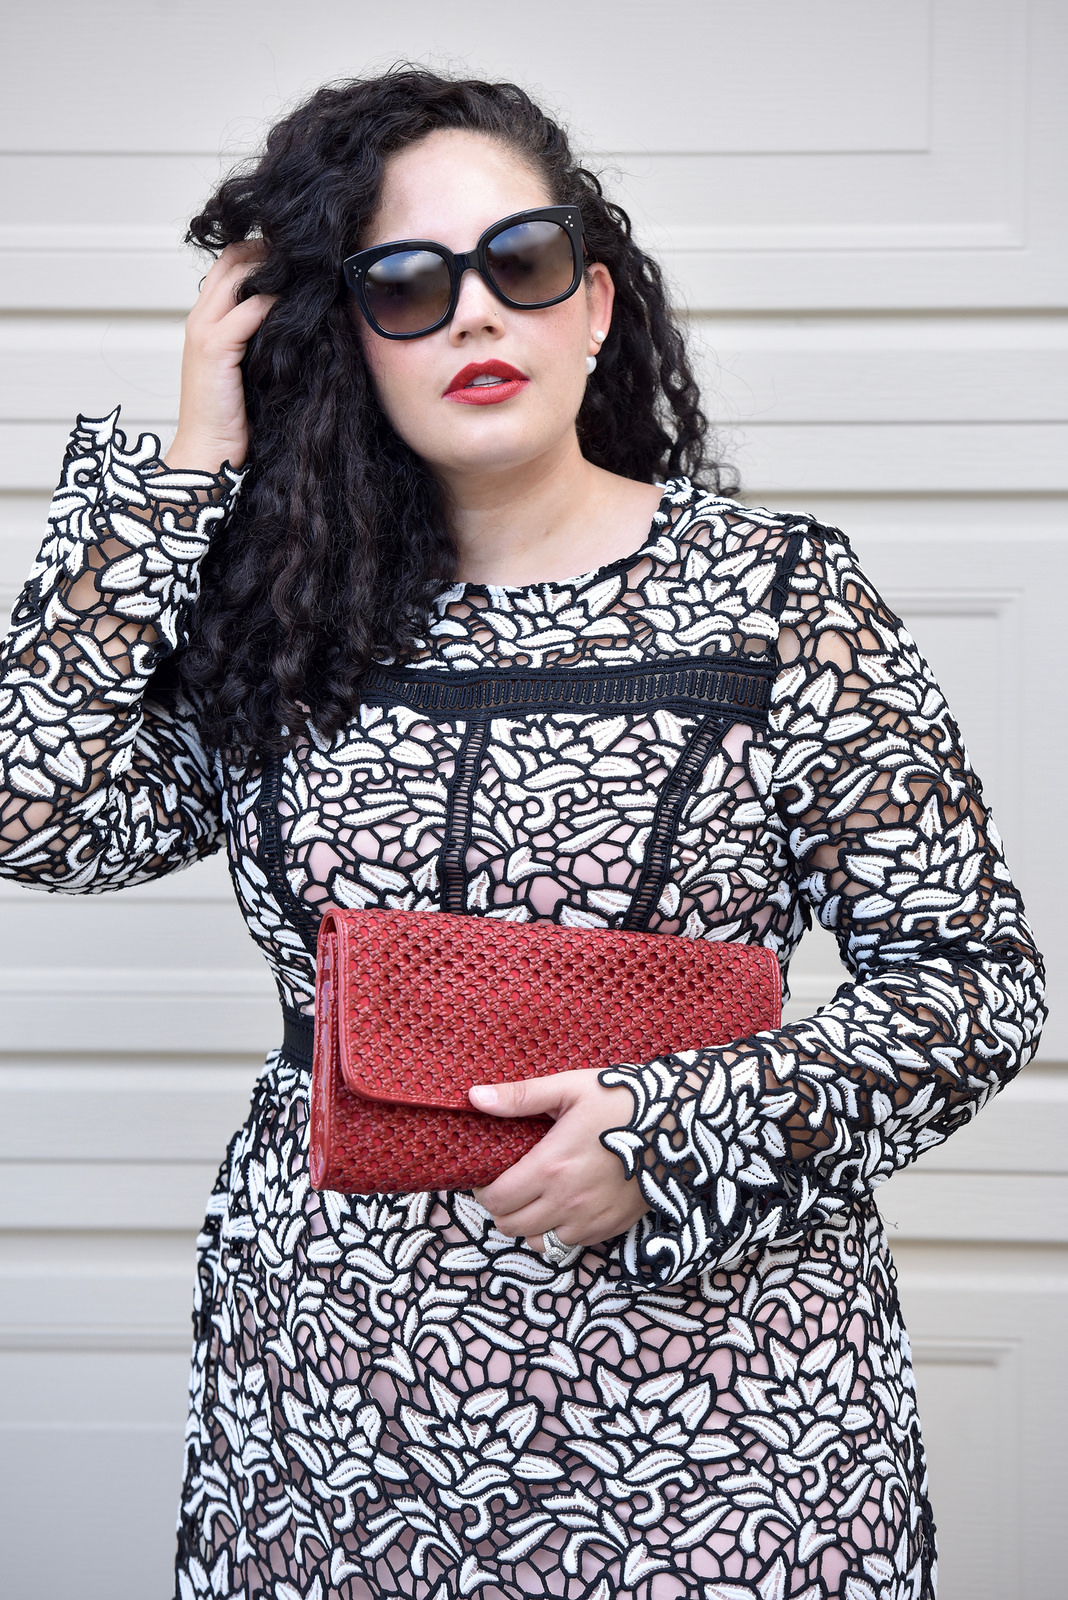 Girl With Curves blogger Tanesha Awasthi wears a lace midi dress and red clutch.